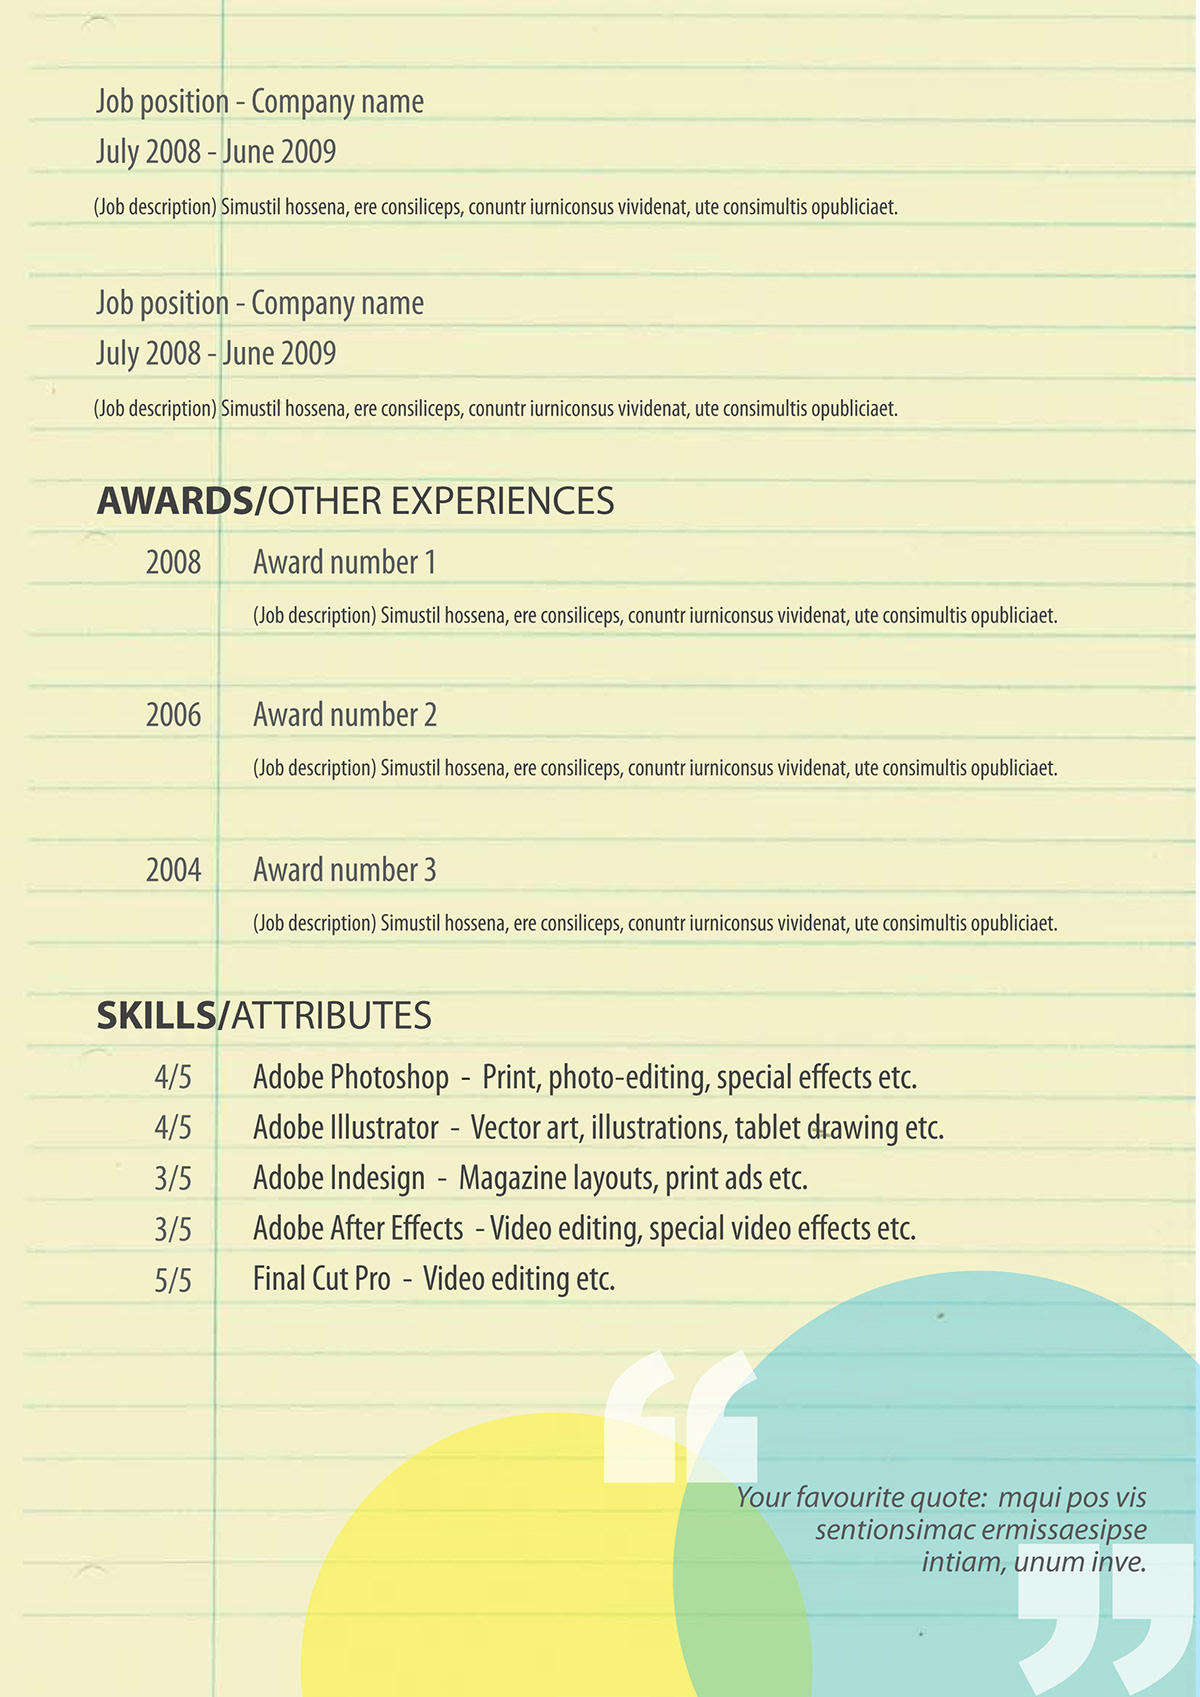 Resume yellow blue pink foolscap lines interview Work  Fun Playful circle quote round lively bright